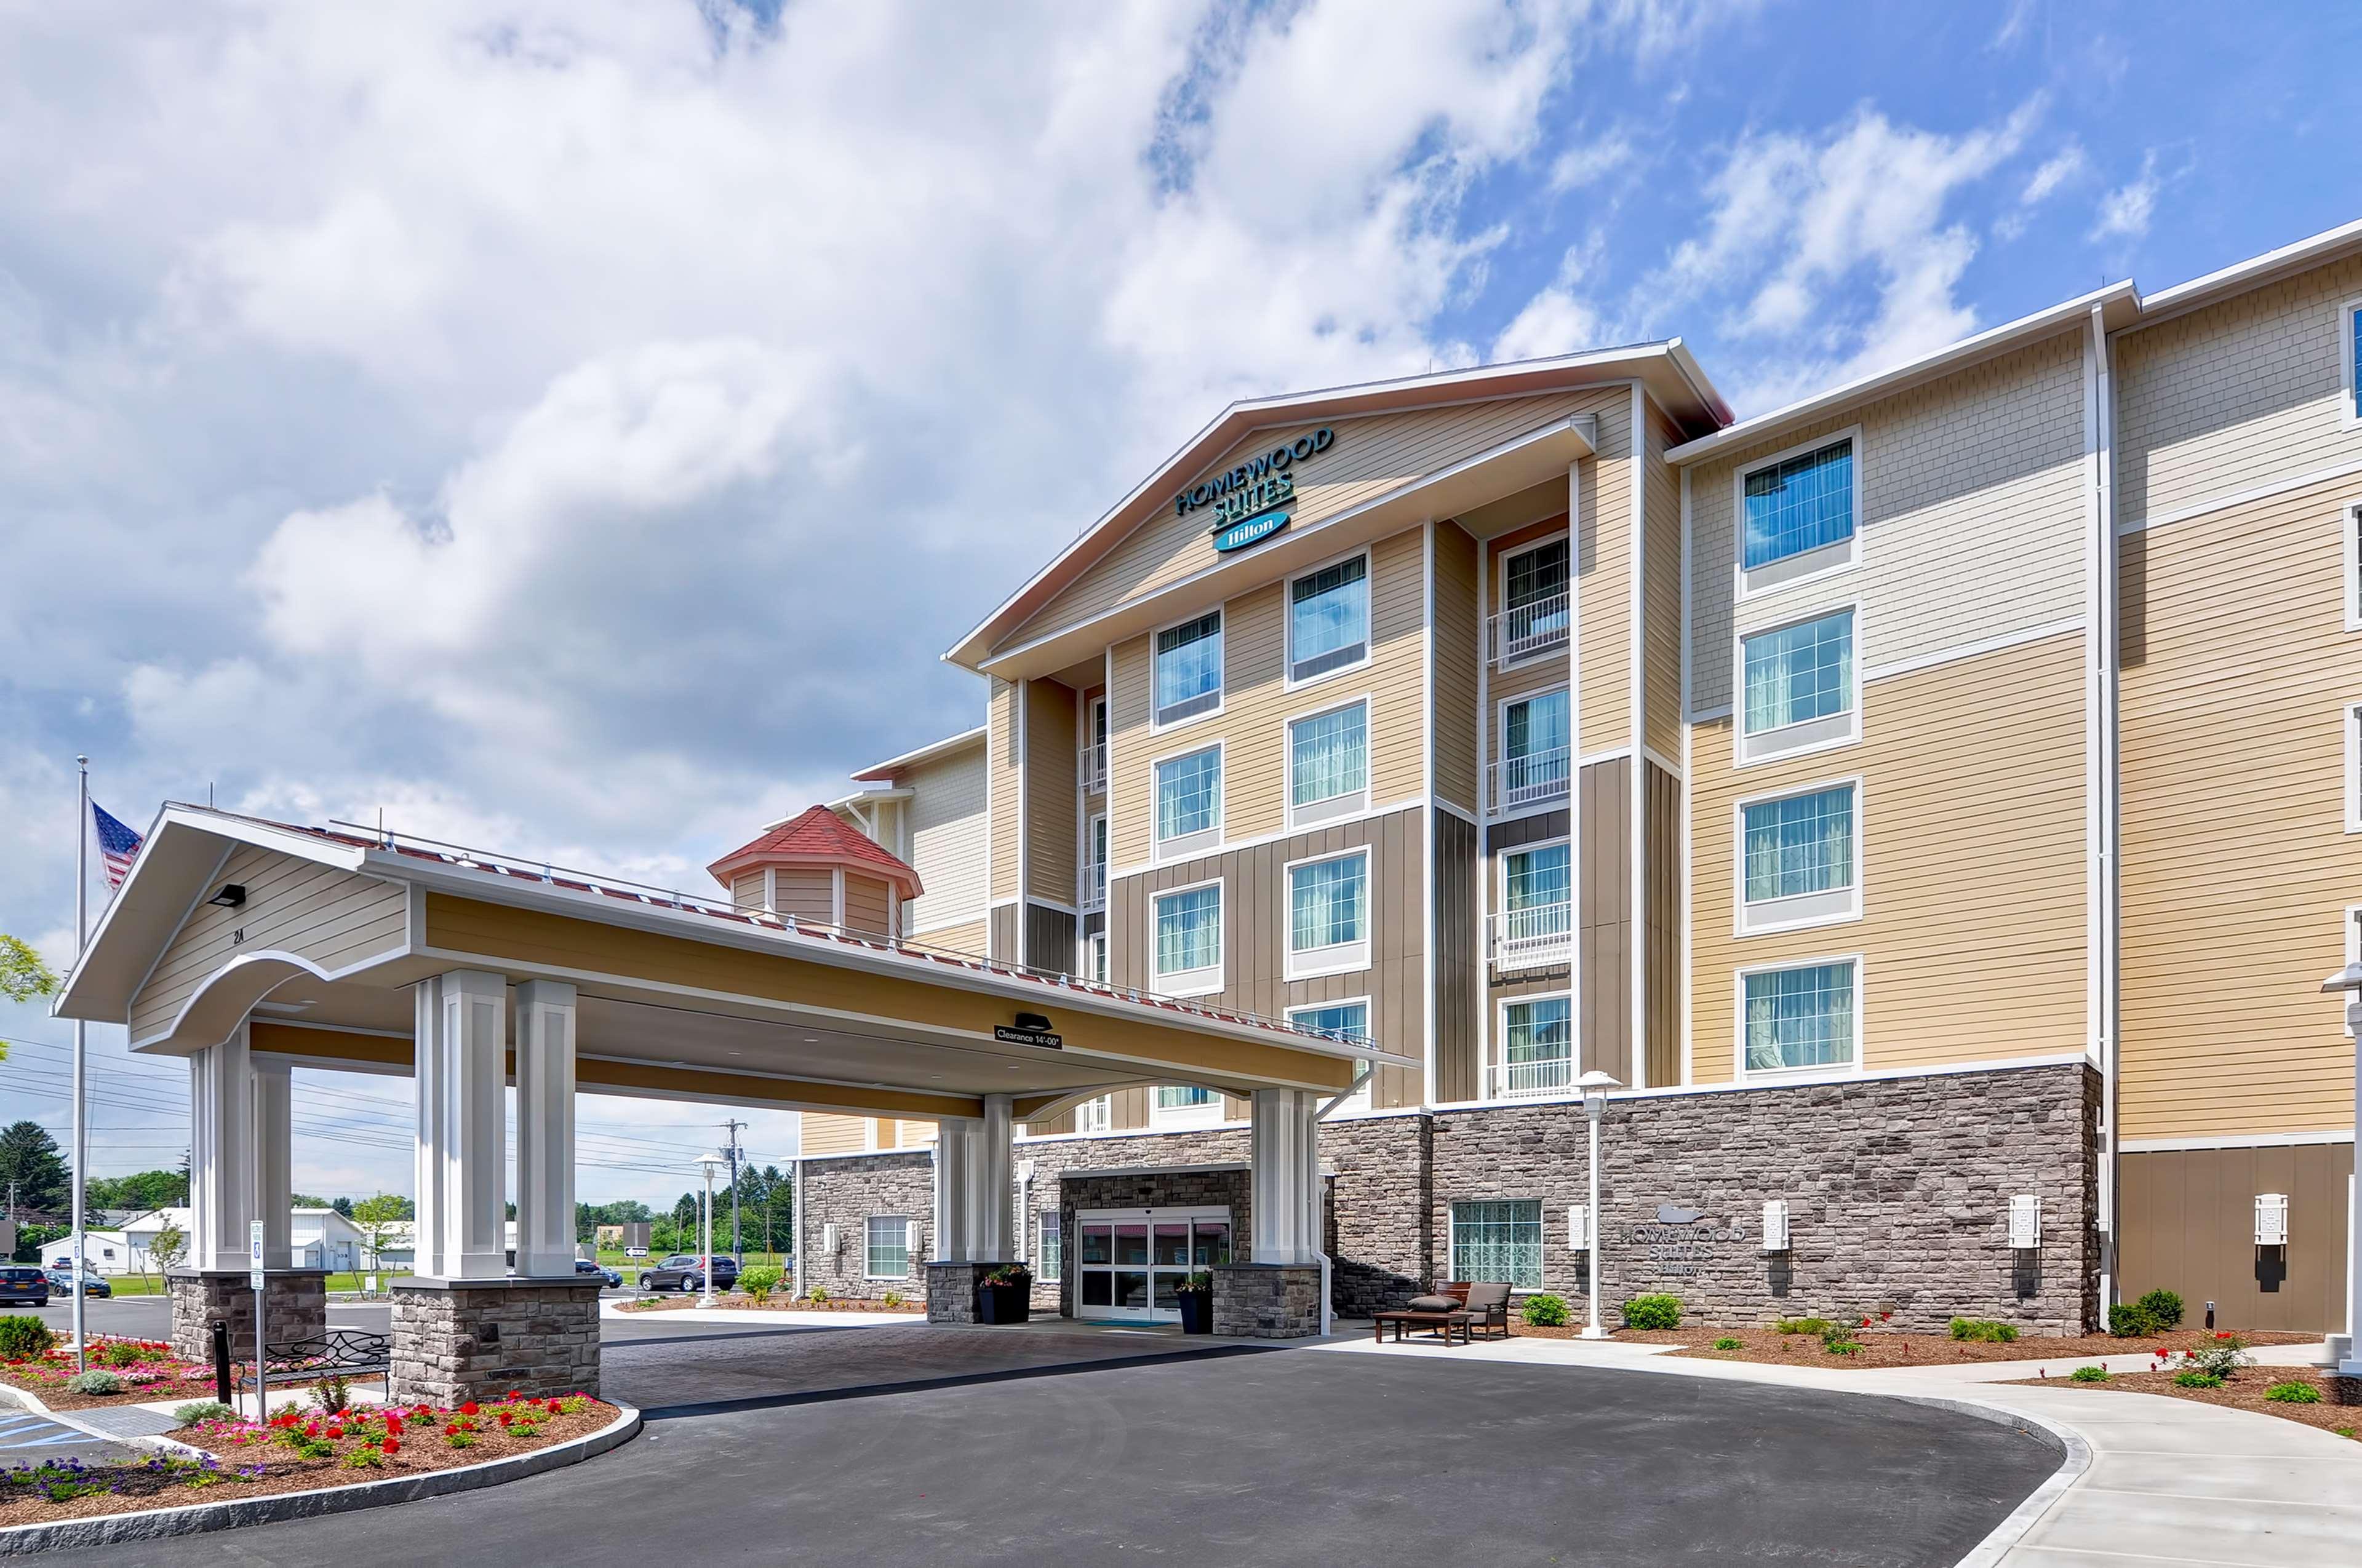 Homewood Suites by Hilton Schenectady image